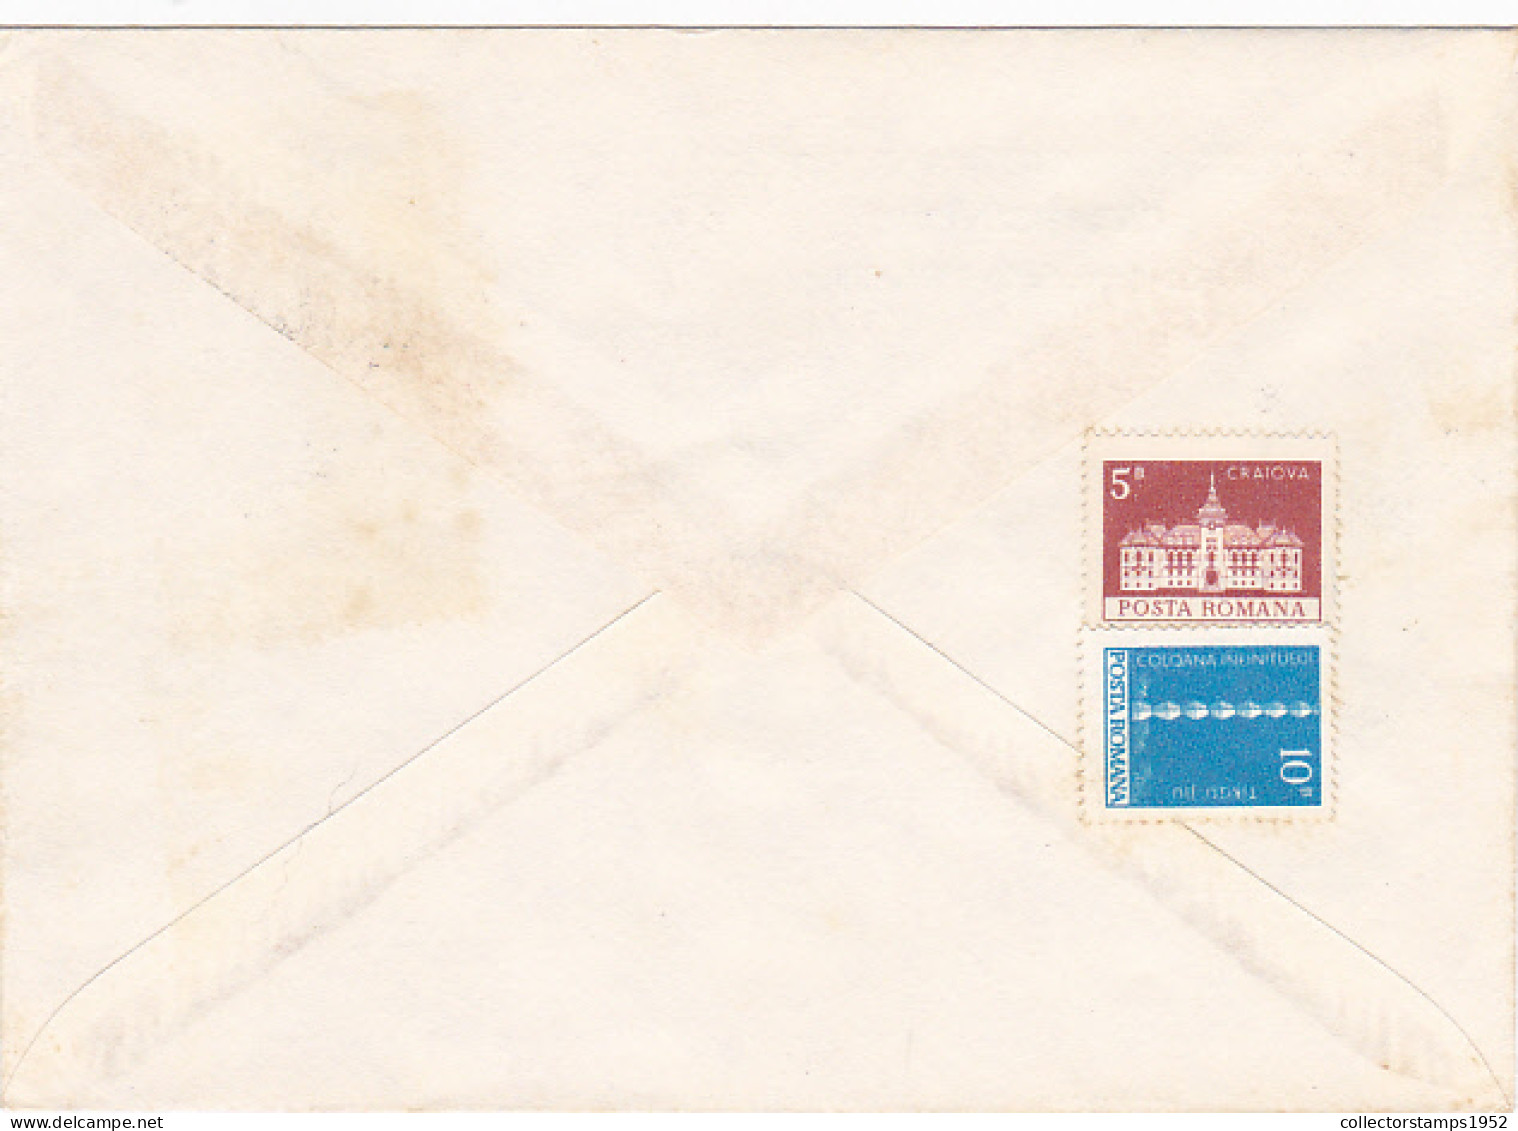 COAT OF ARMS, CARAS SEVERIN PHILATELIC EXHIBITION, SPECIAL COVER, 1975, ROMANIA - Lettres & Documents